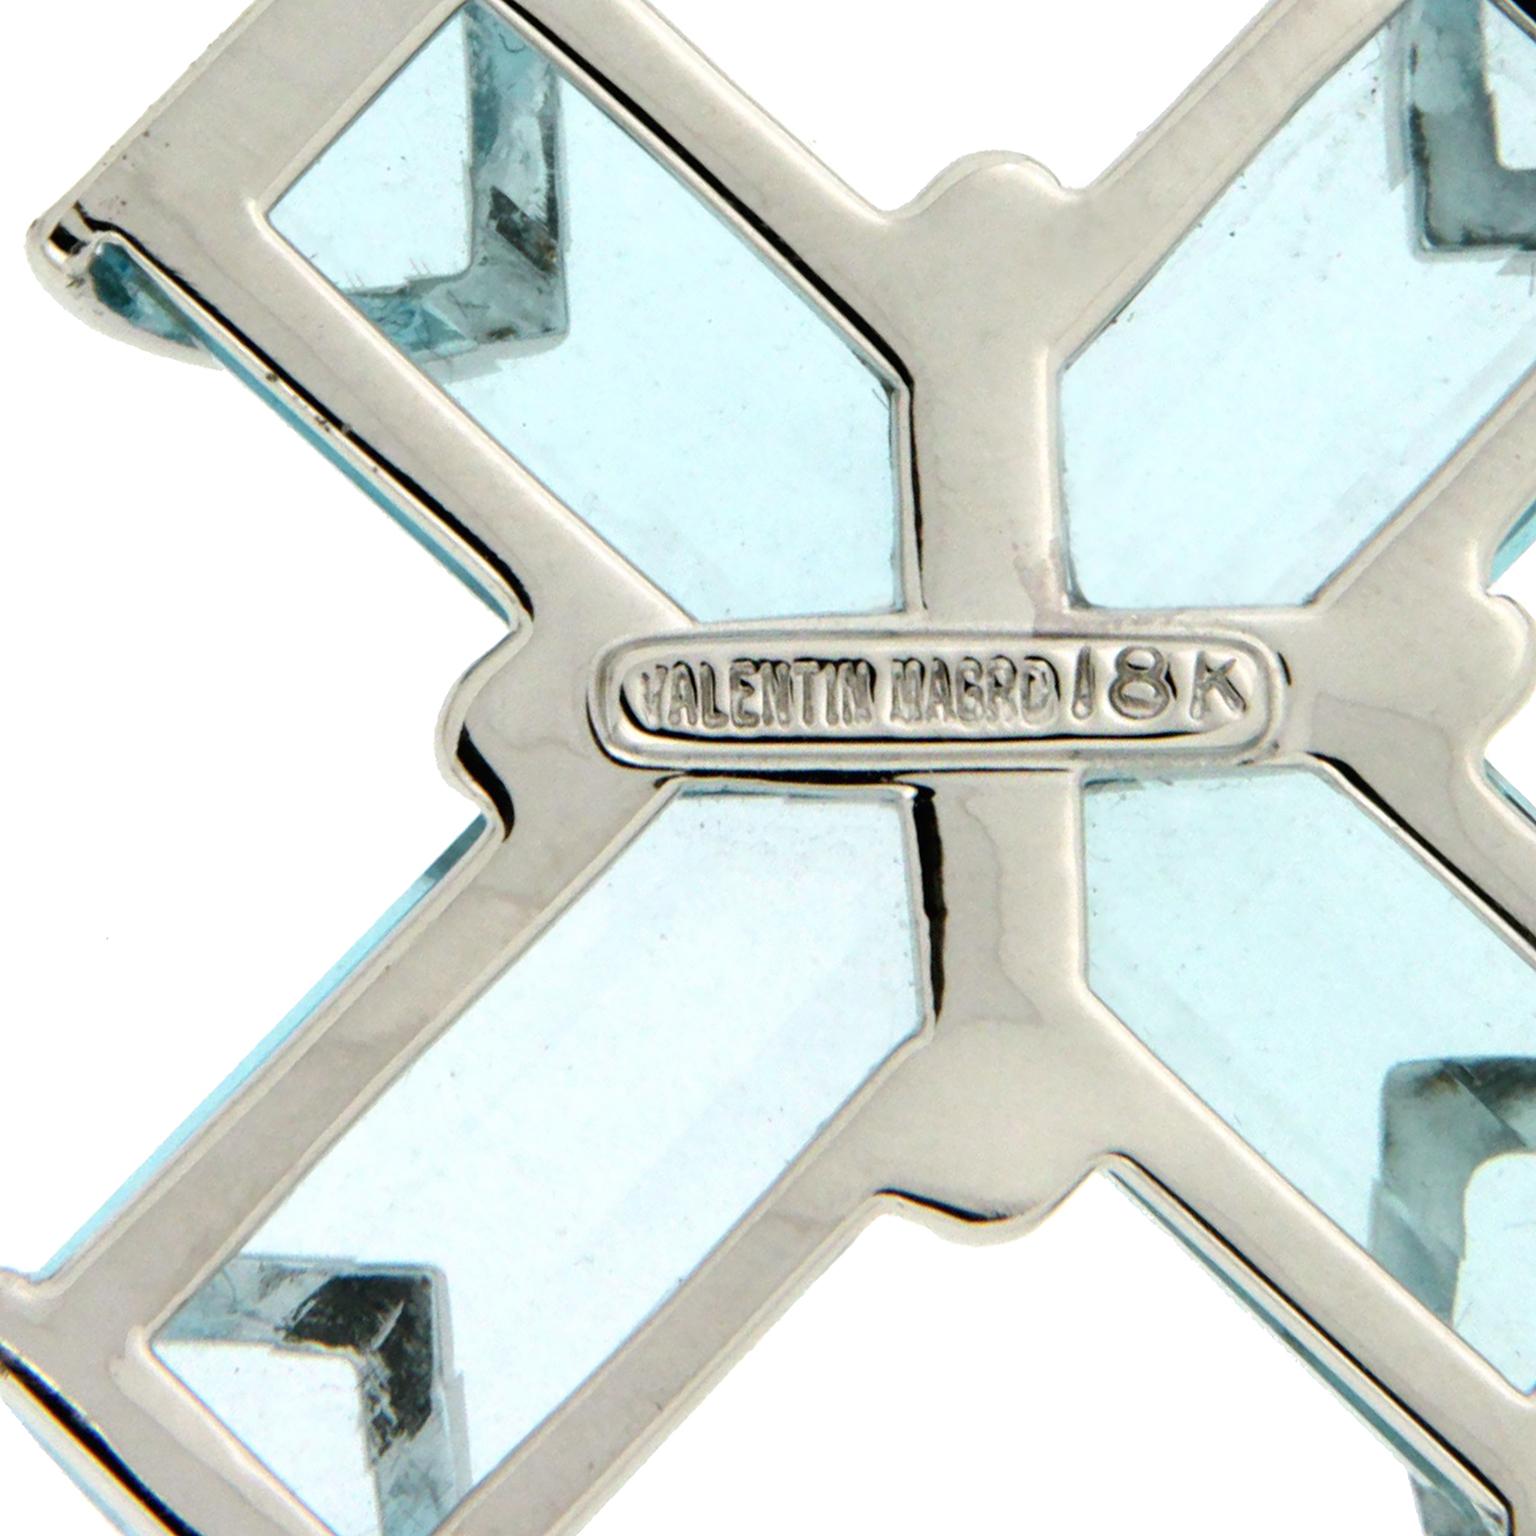 White gold accompanies the light-hued blue topaz for this pendant. Four-step cuts of the gem create the shape of a cross. 18k white gold overlaps from opposite directions in the center, forming an X. Each end of the cross also has V-shaped